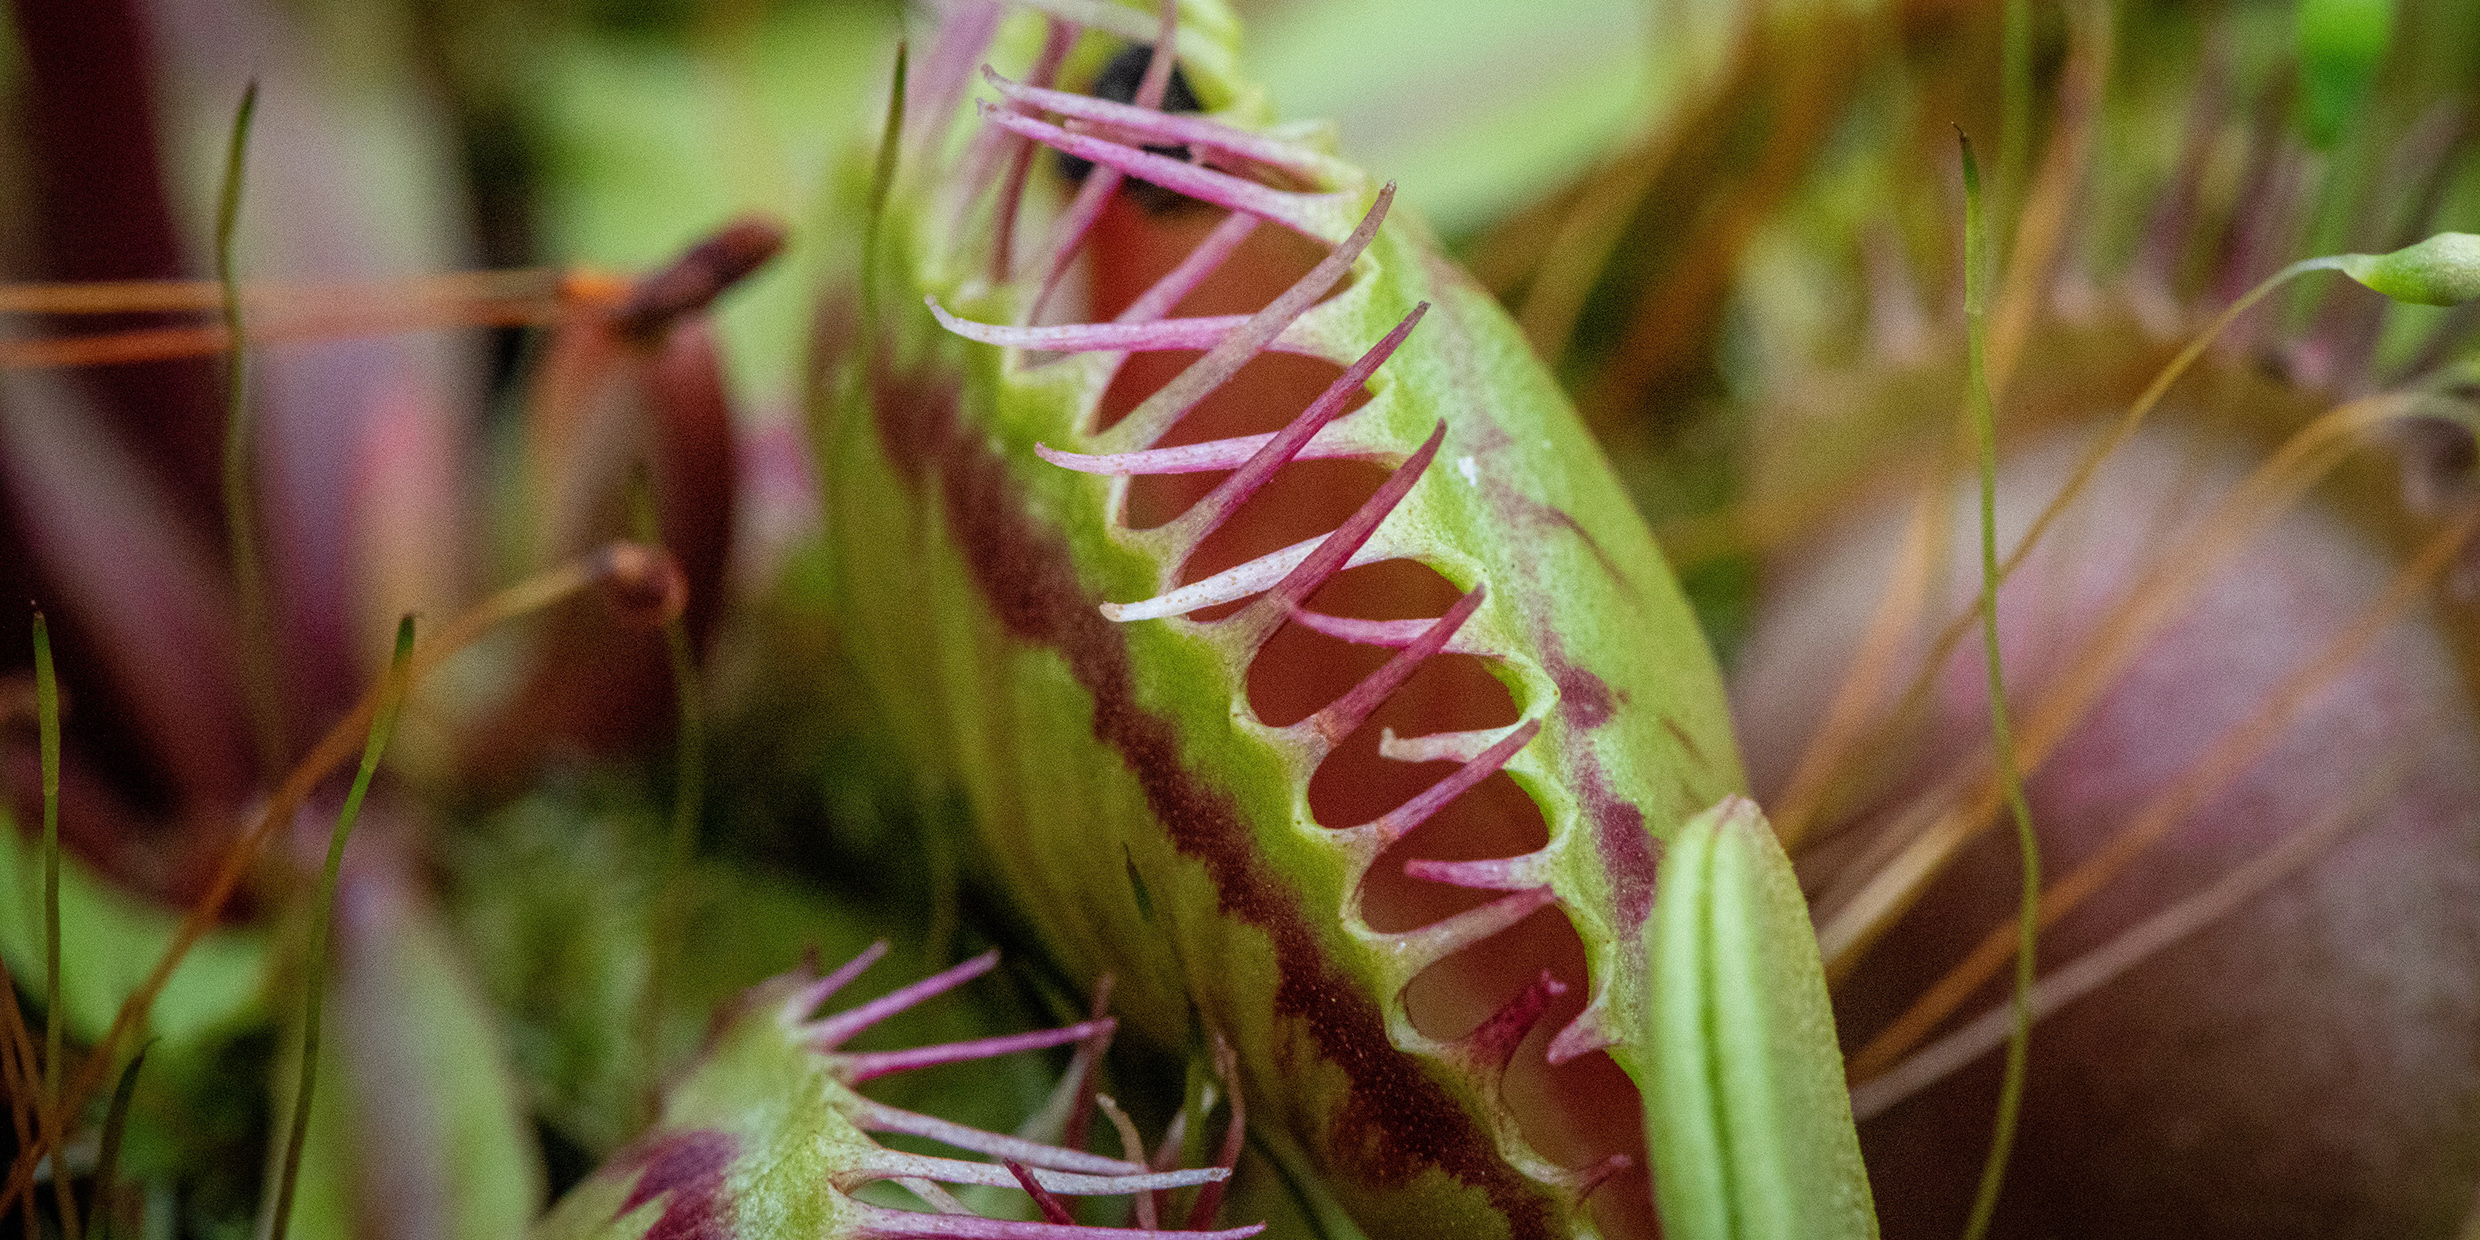 Plants that eat animals: They're out there - Science Musings